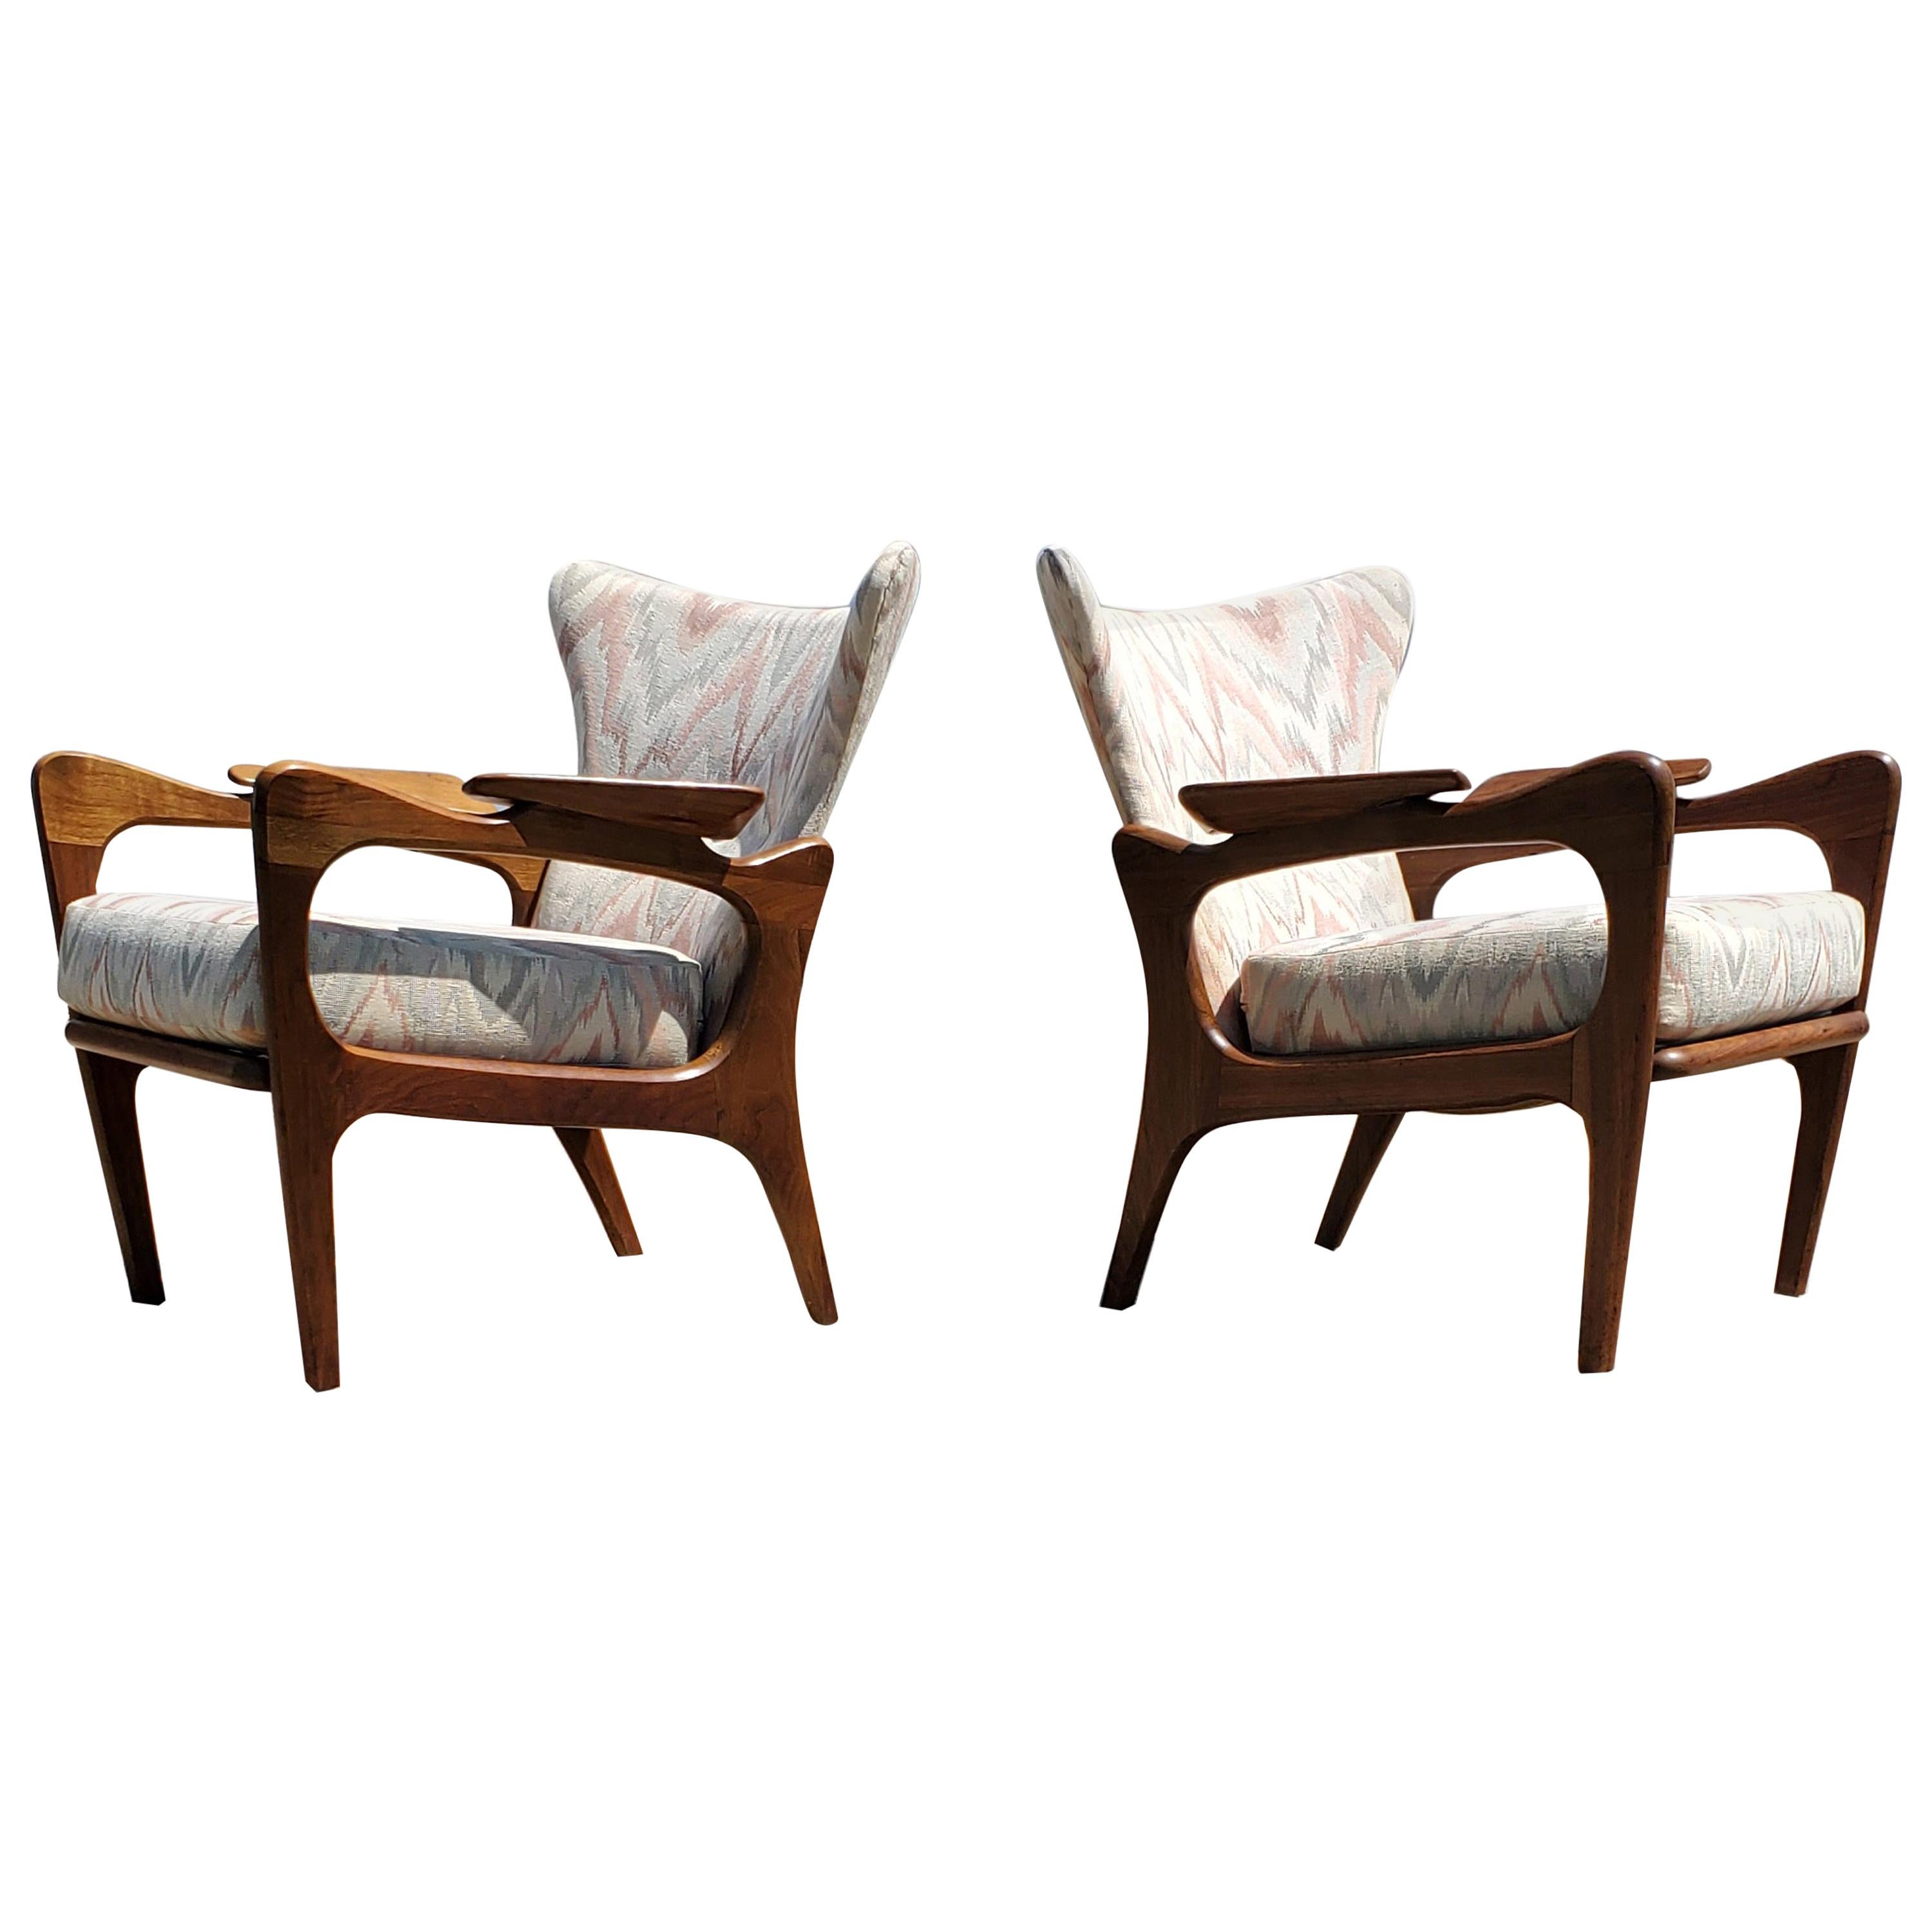 Adrian Pearsall for Craft Associates Lounge Chairs